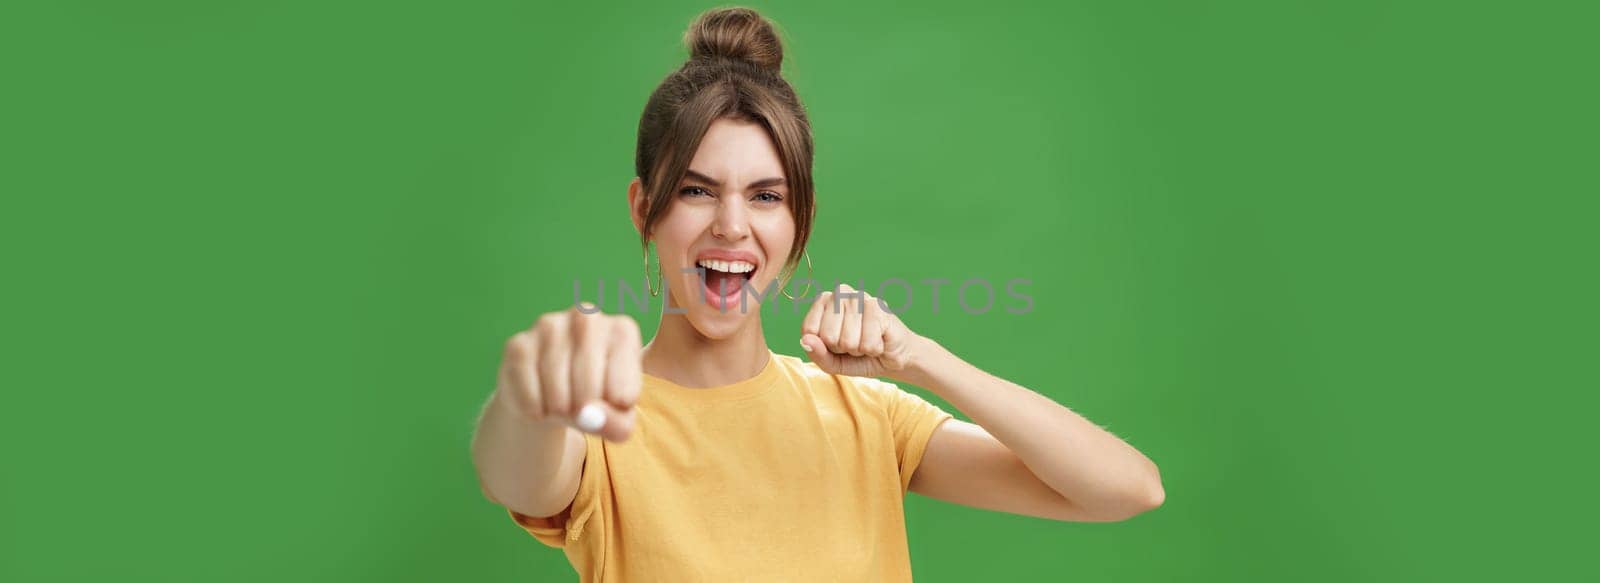 Cute female rebel in yellow t-shirt with gap teeth pulling fist towards camera as if showing fighting skills yelling daring and excited standing over green background smiling acting like boxer. Body language concept